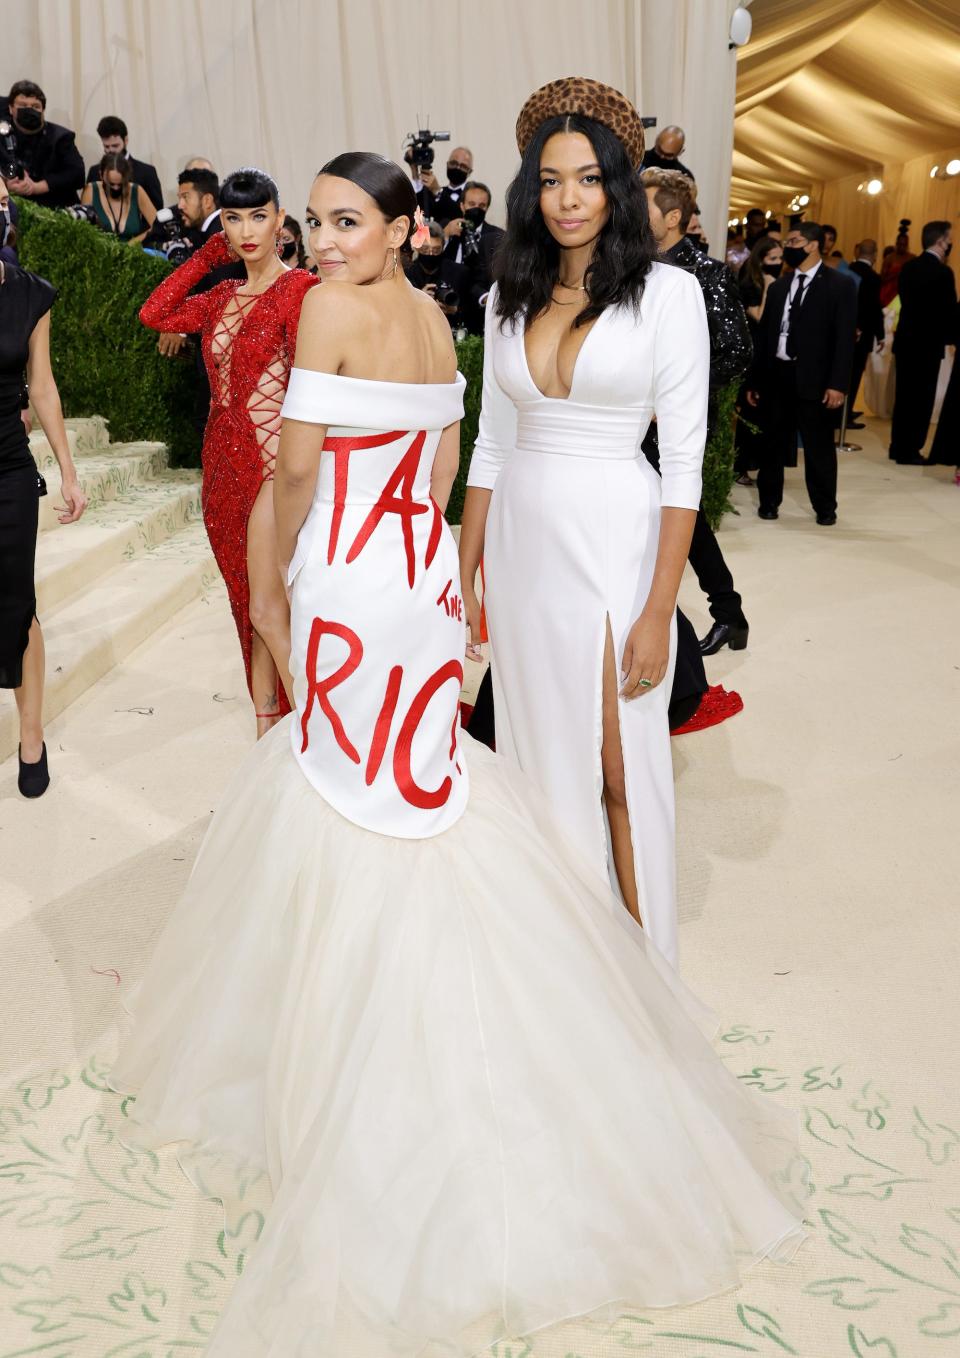 A photo a Democratic Rep. Alexandria Ocasio-Cortez wearing a dress with the phrase, "Tax the Rich" on it."